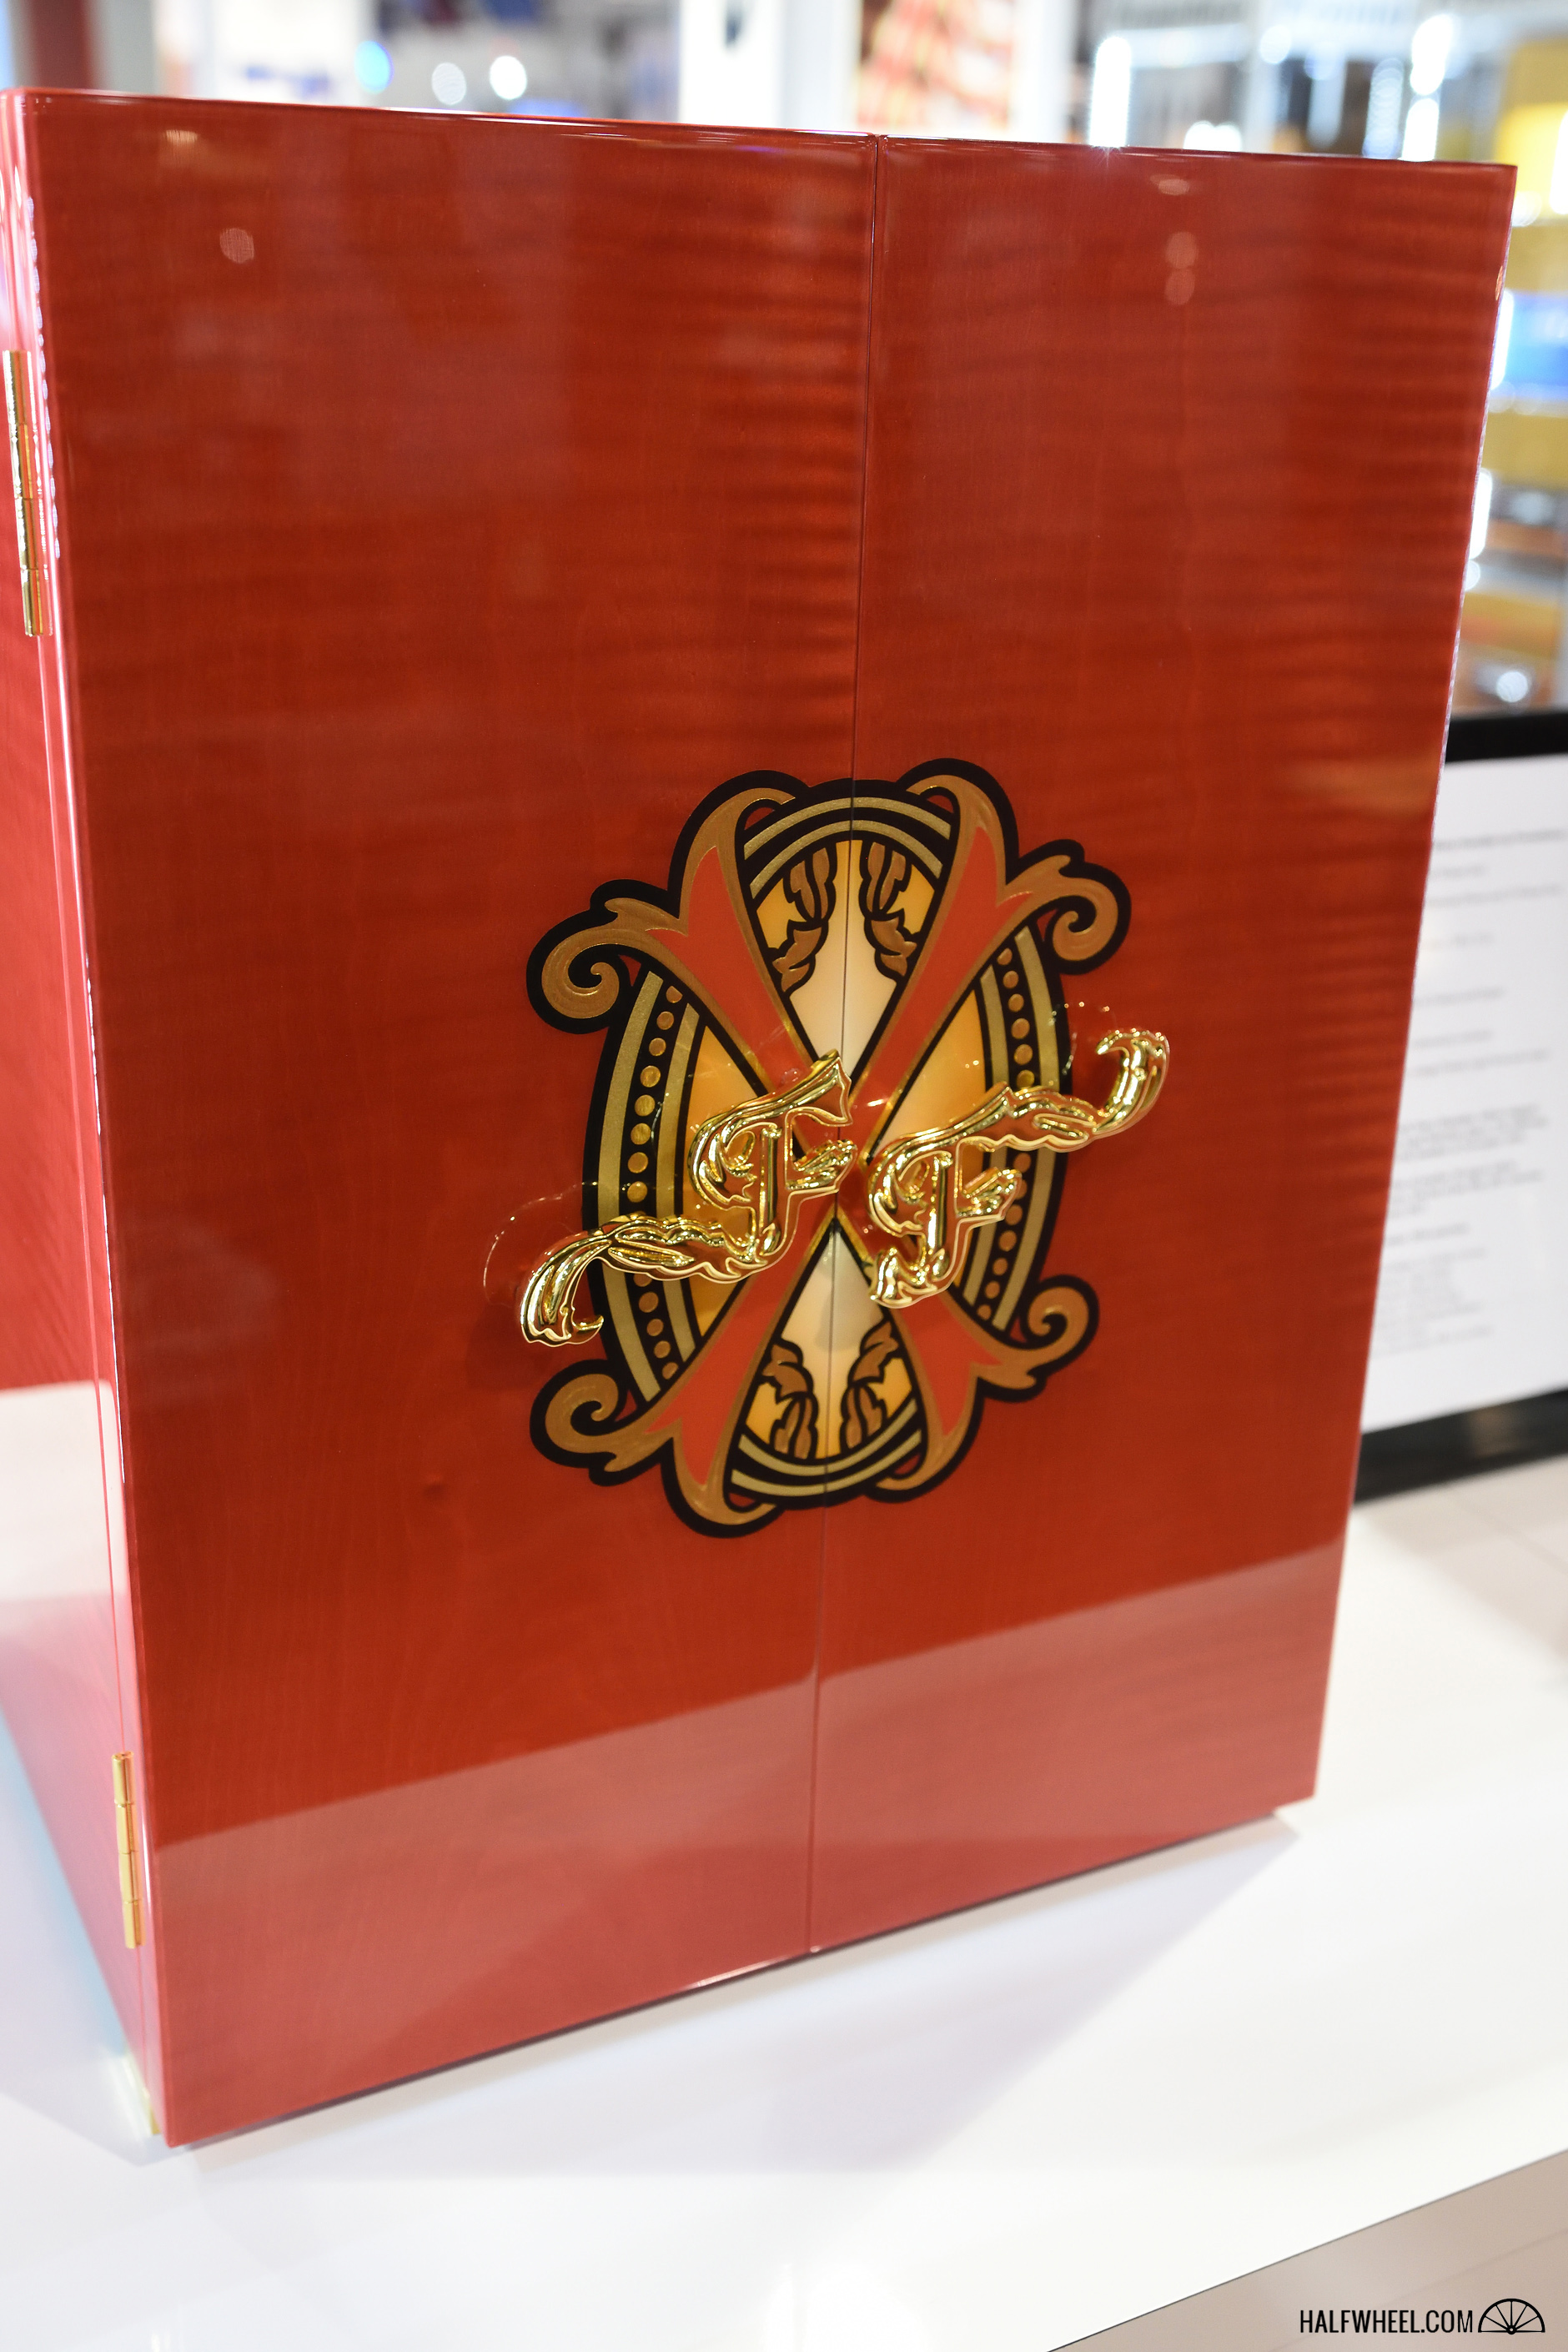 Prometheus 2016 Limited Edition Fuente Fuente Opus X Story Humidor 1 IPCPR 2016